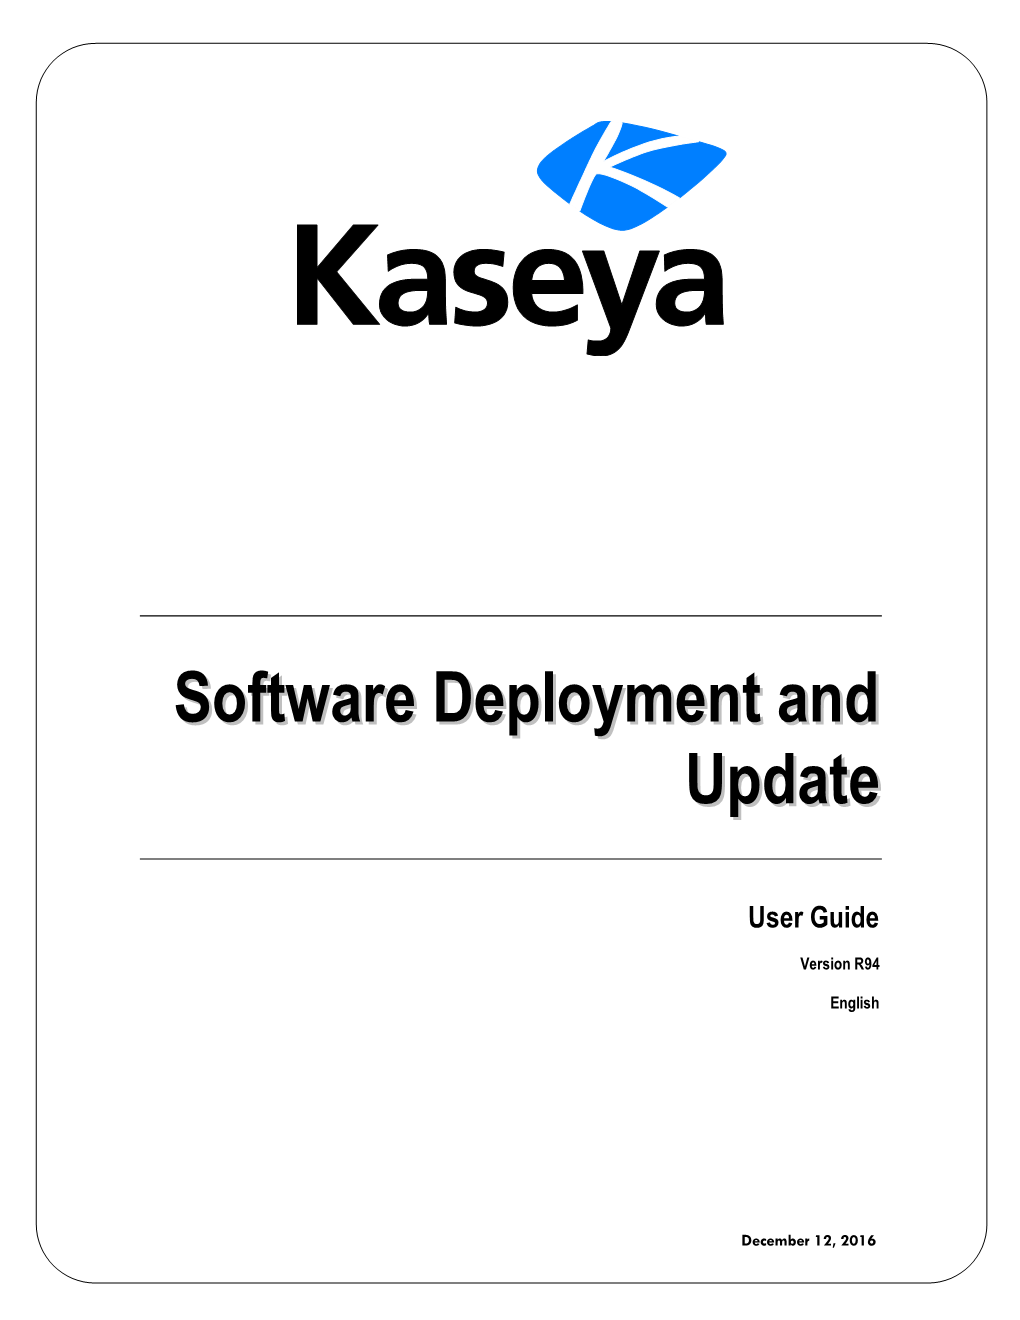 Software Deployment and Update Overview